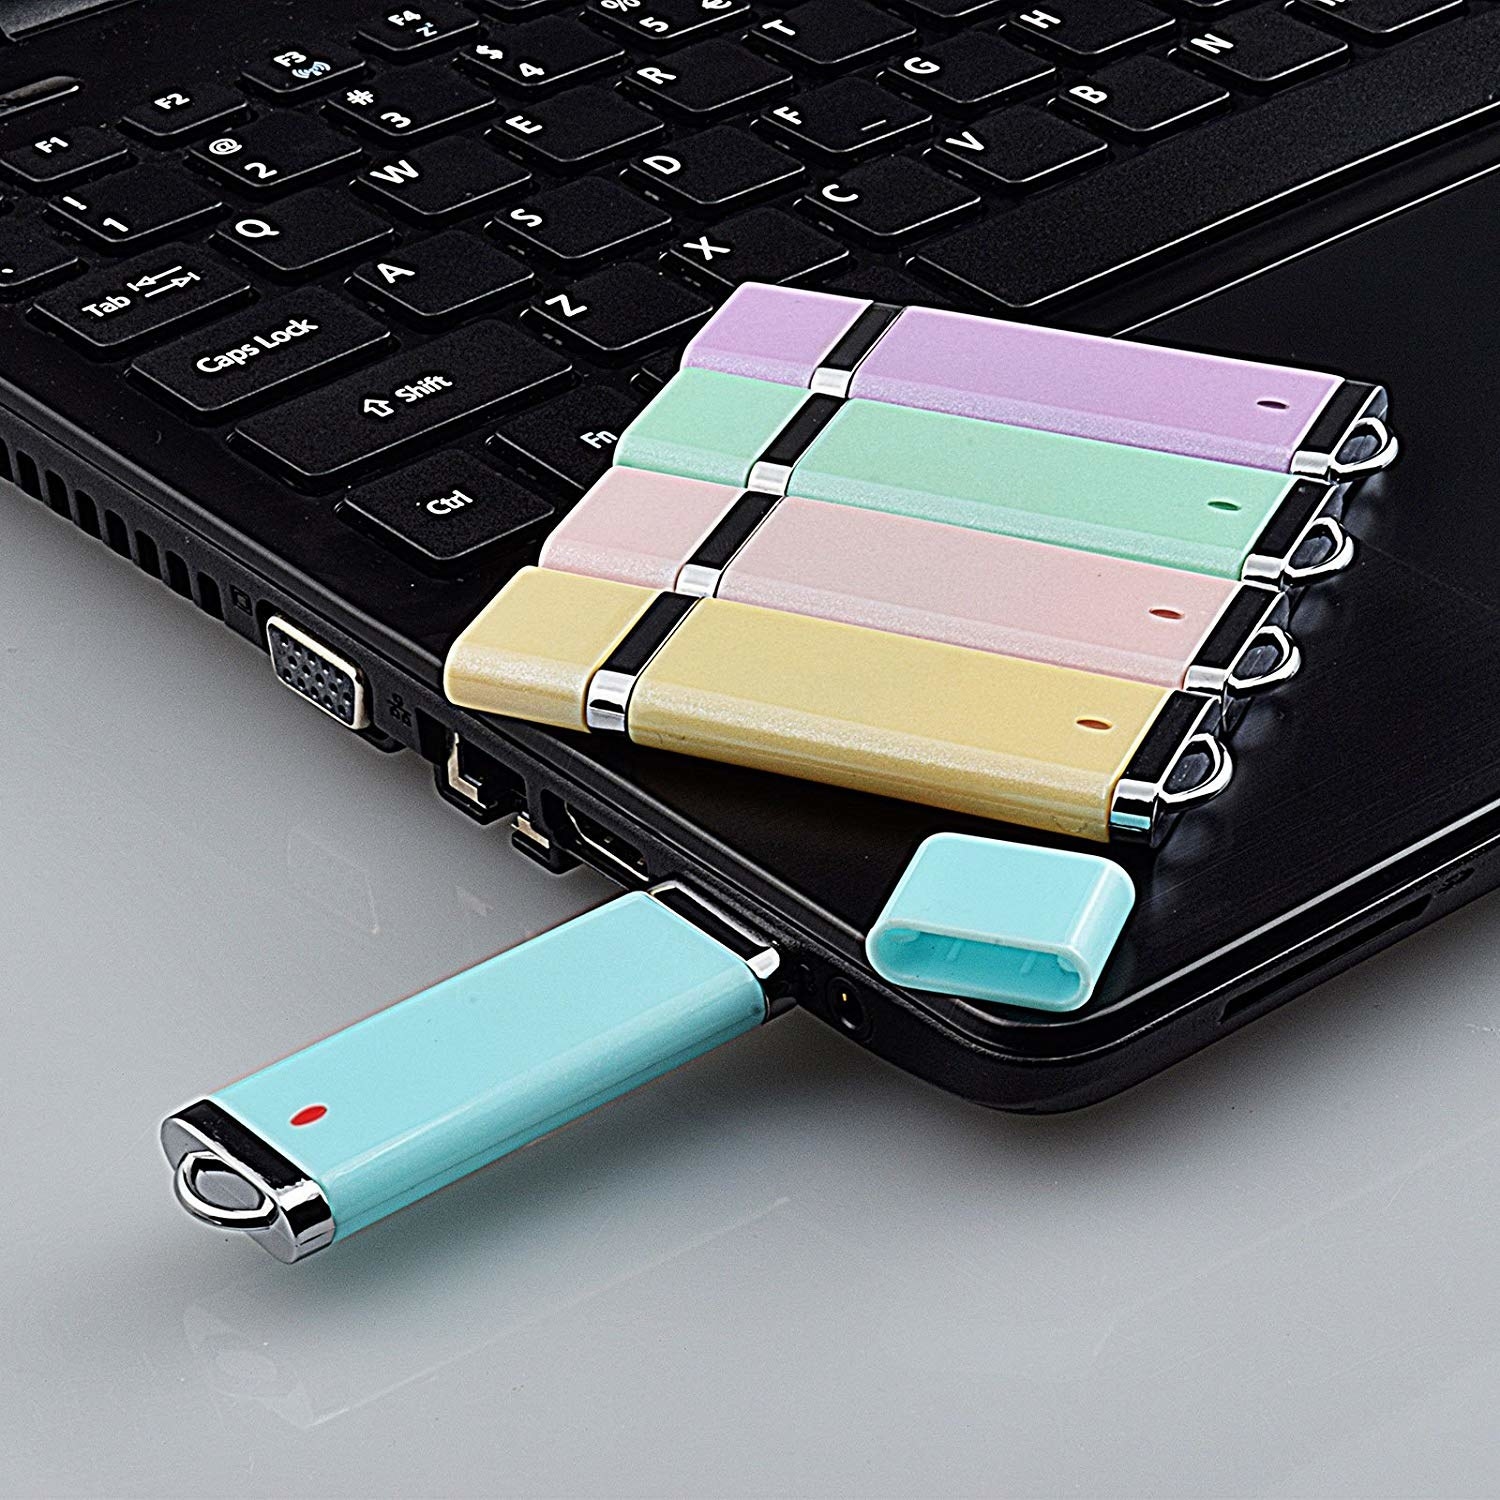 Four USB flash drives sitting on top of a laptop One USB flash drive inserted on the side of the laptop